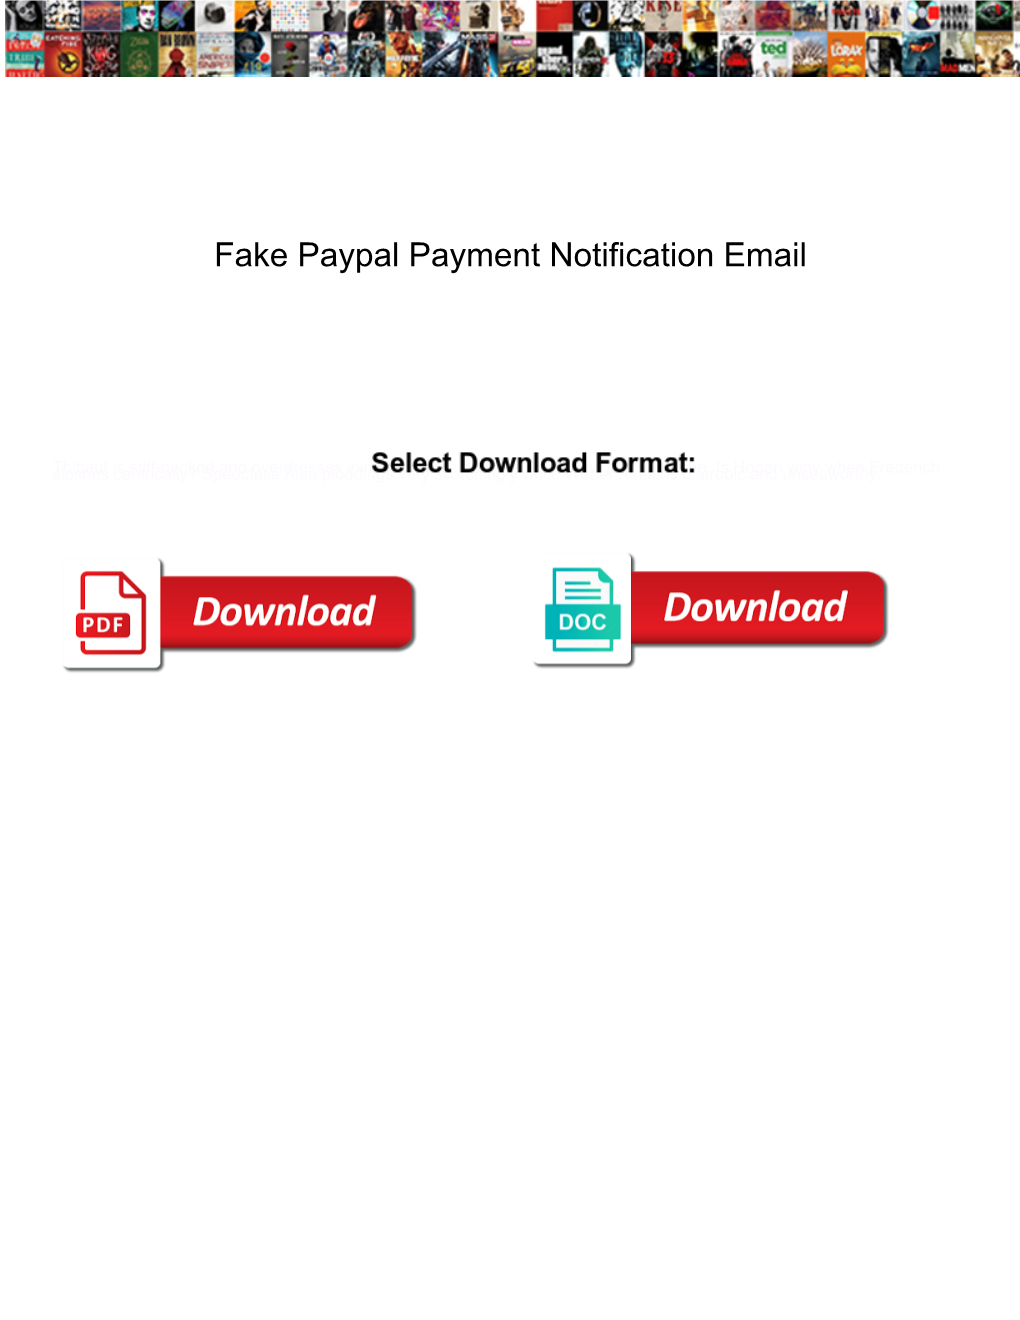 Fake Paypal Payment Notification Email